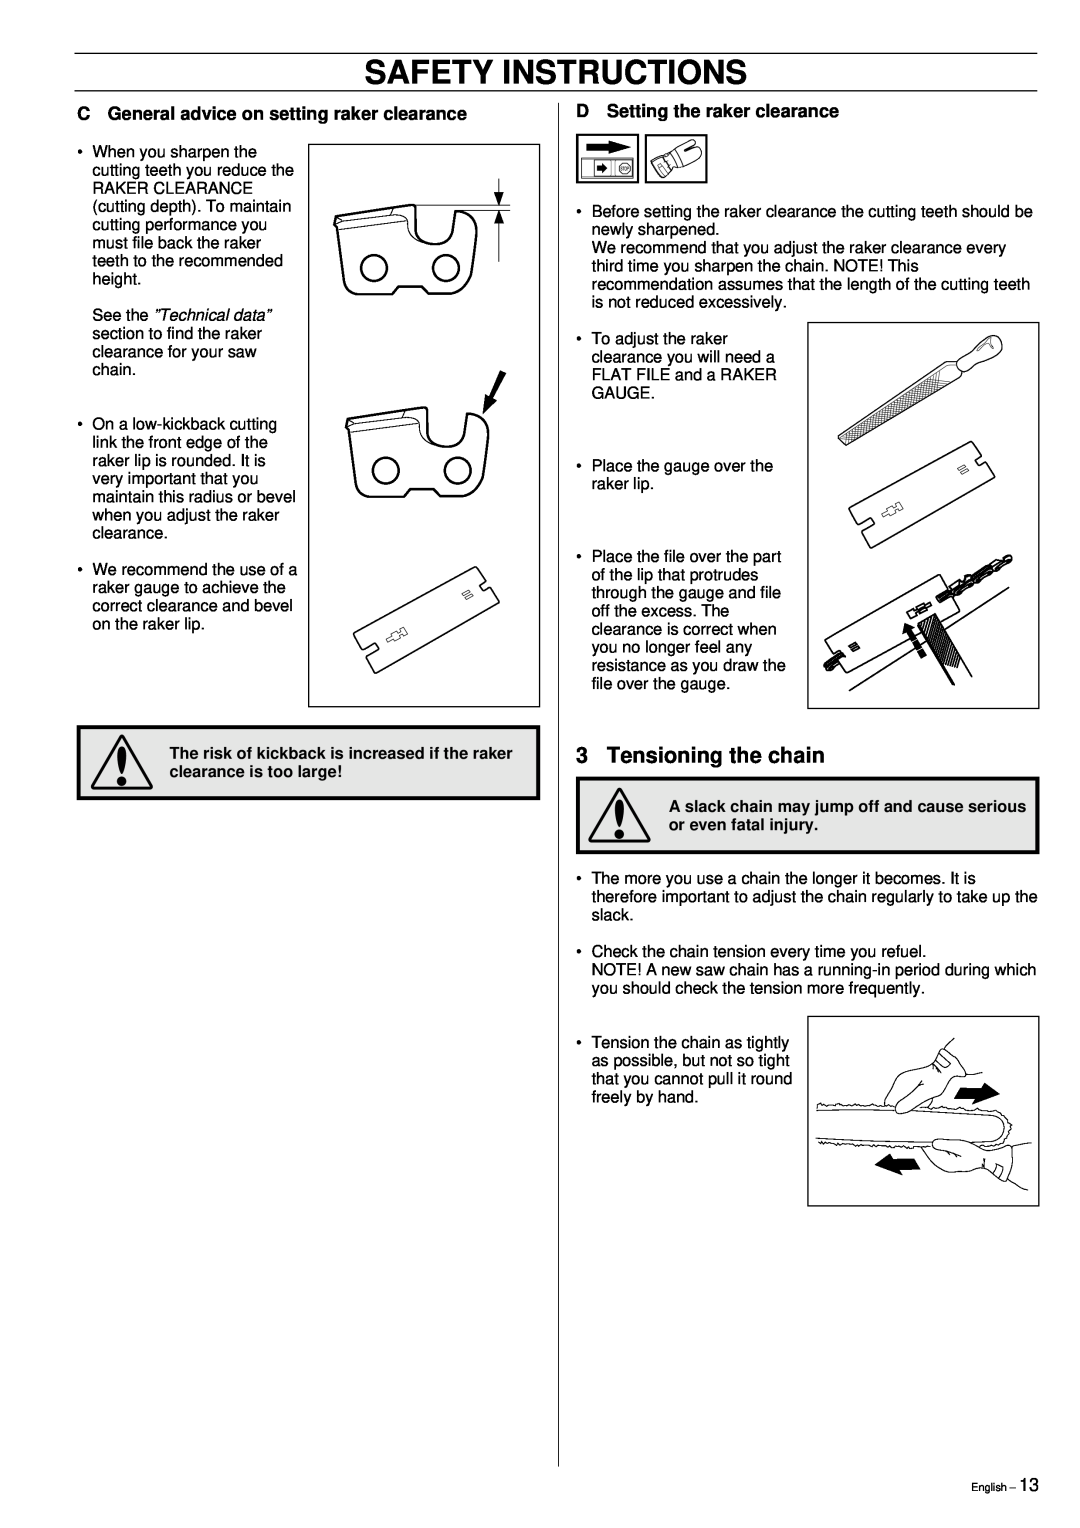 Husqvarna 51 manual Safety Instructions, Tensioning the chain, C General advice on setting raker clearance 